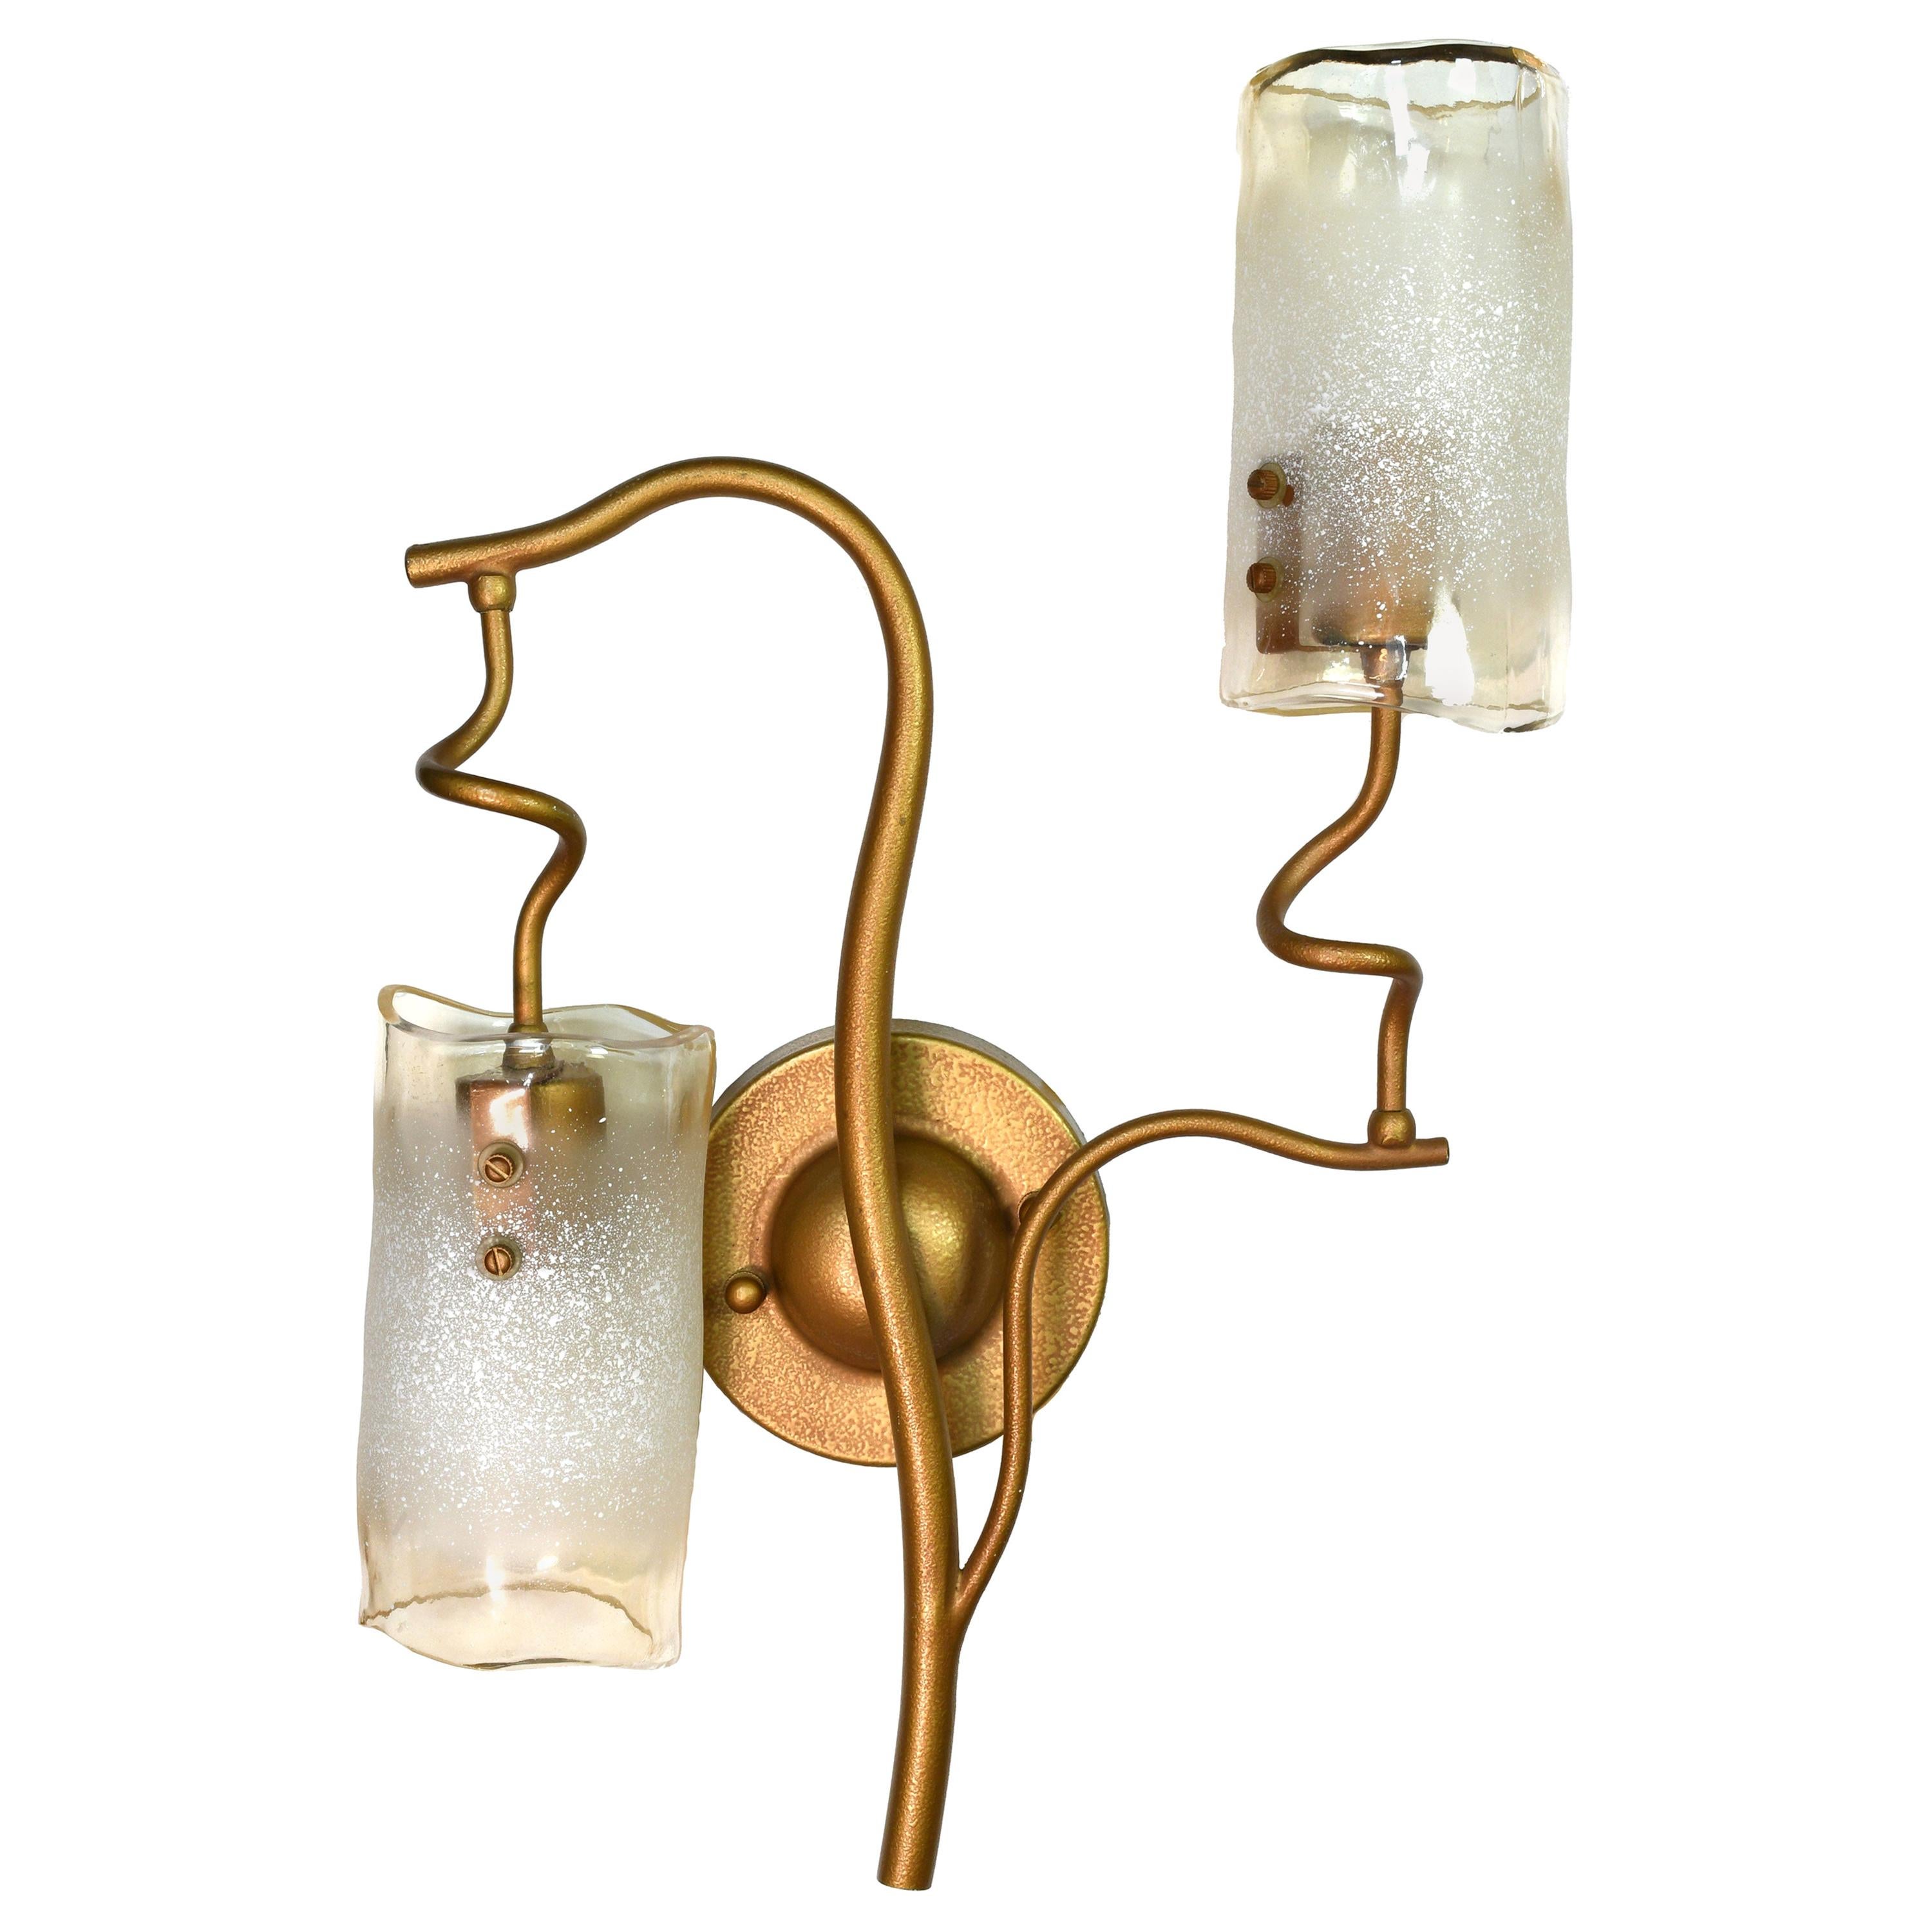 Curvilinear Mid-Century Modern Sconce For Sale